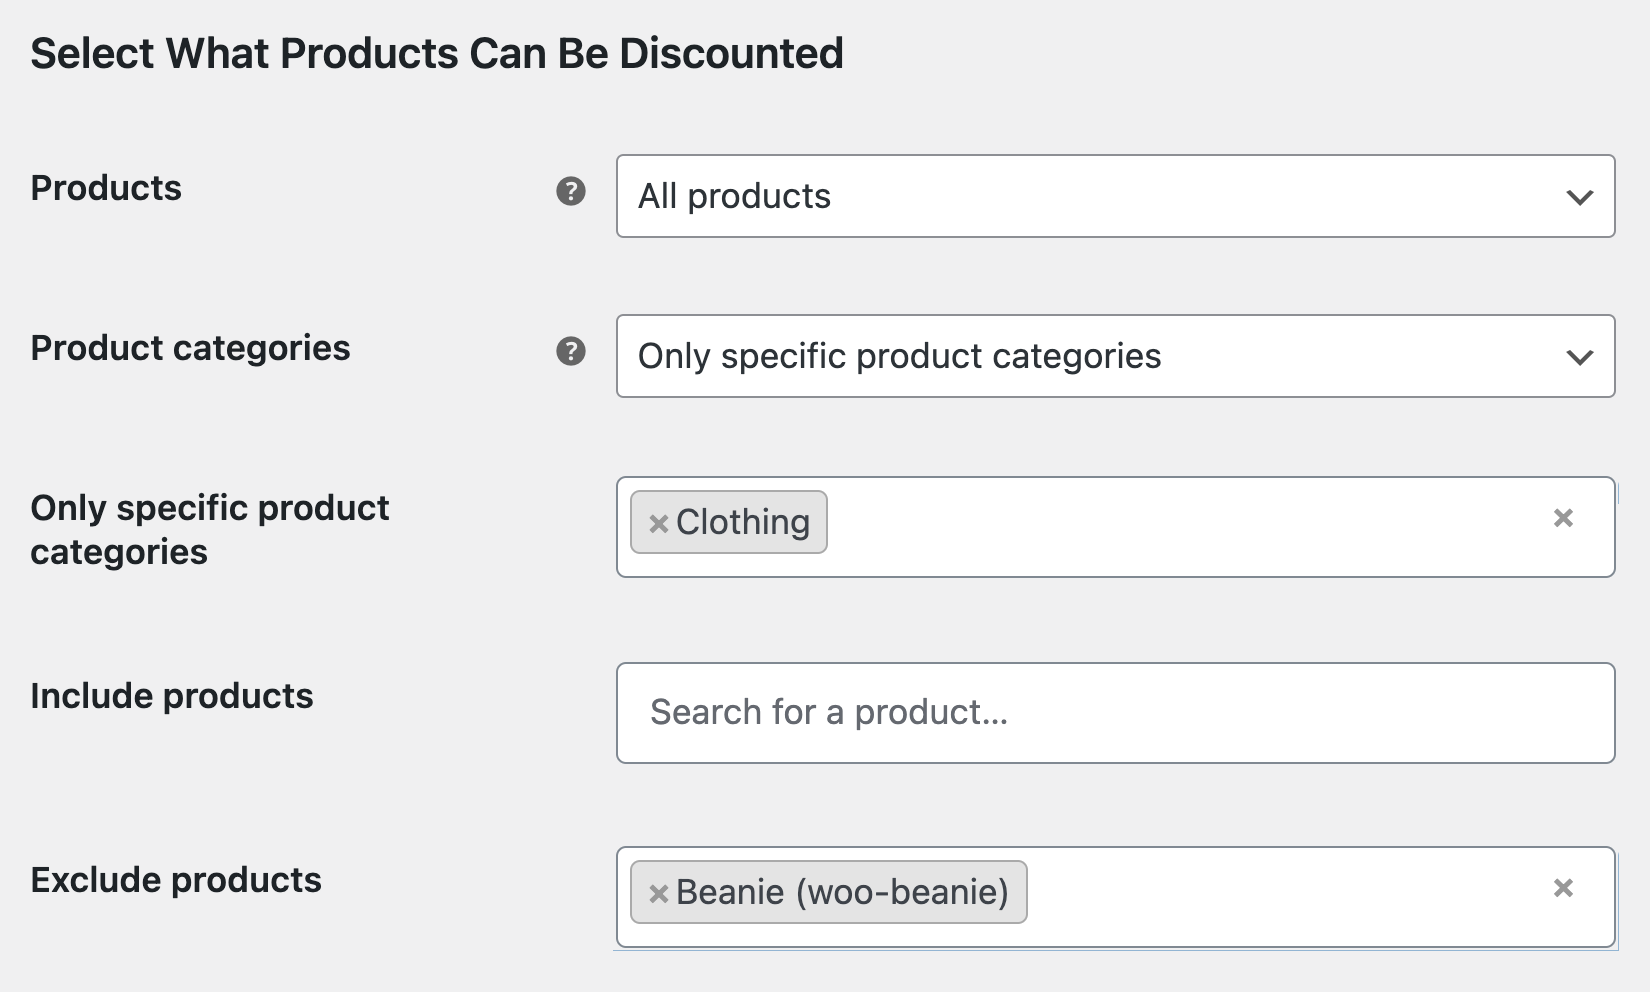 Settings for restricting the applicable products to the progressive discount